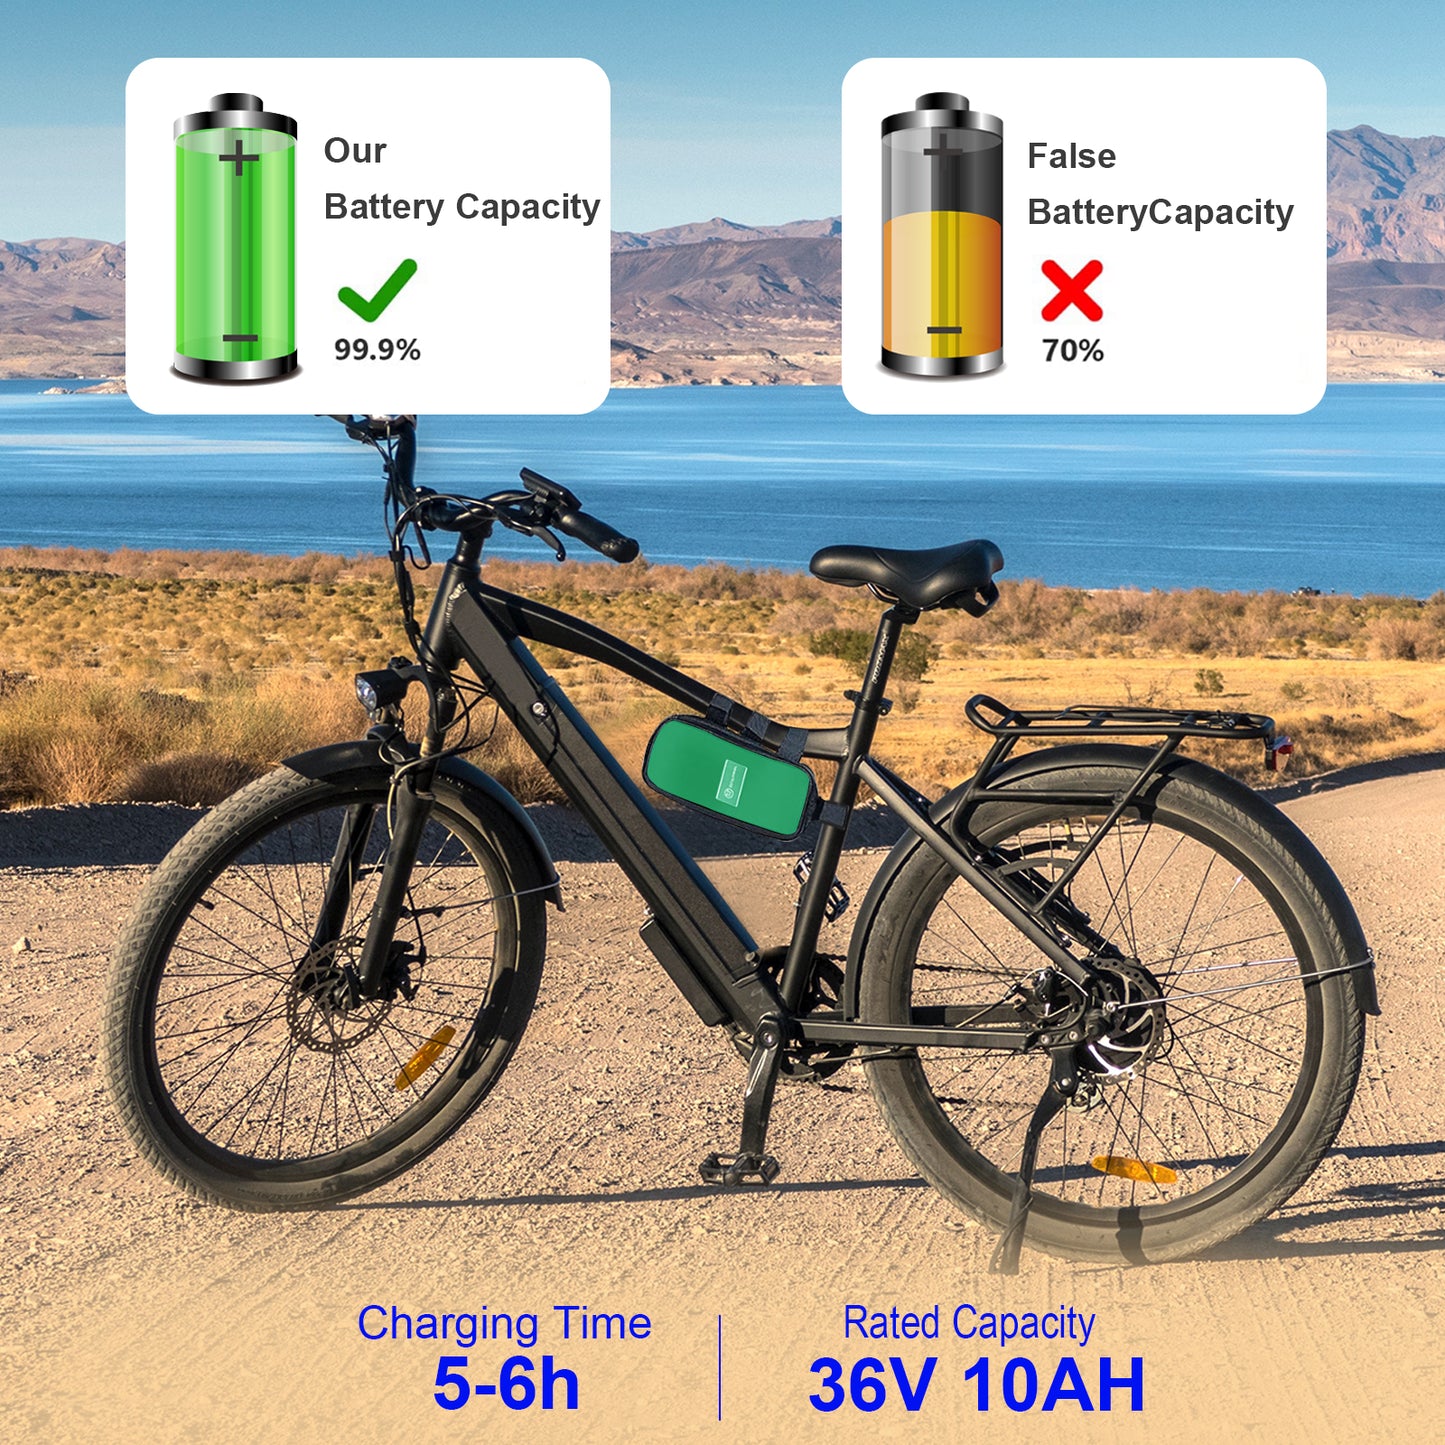 BtrPower Ebike Battery 36V 10AH, Li- ion Battery Pack with 3A Charger and BMS